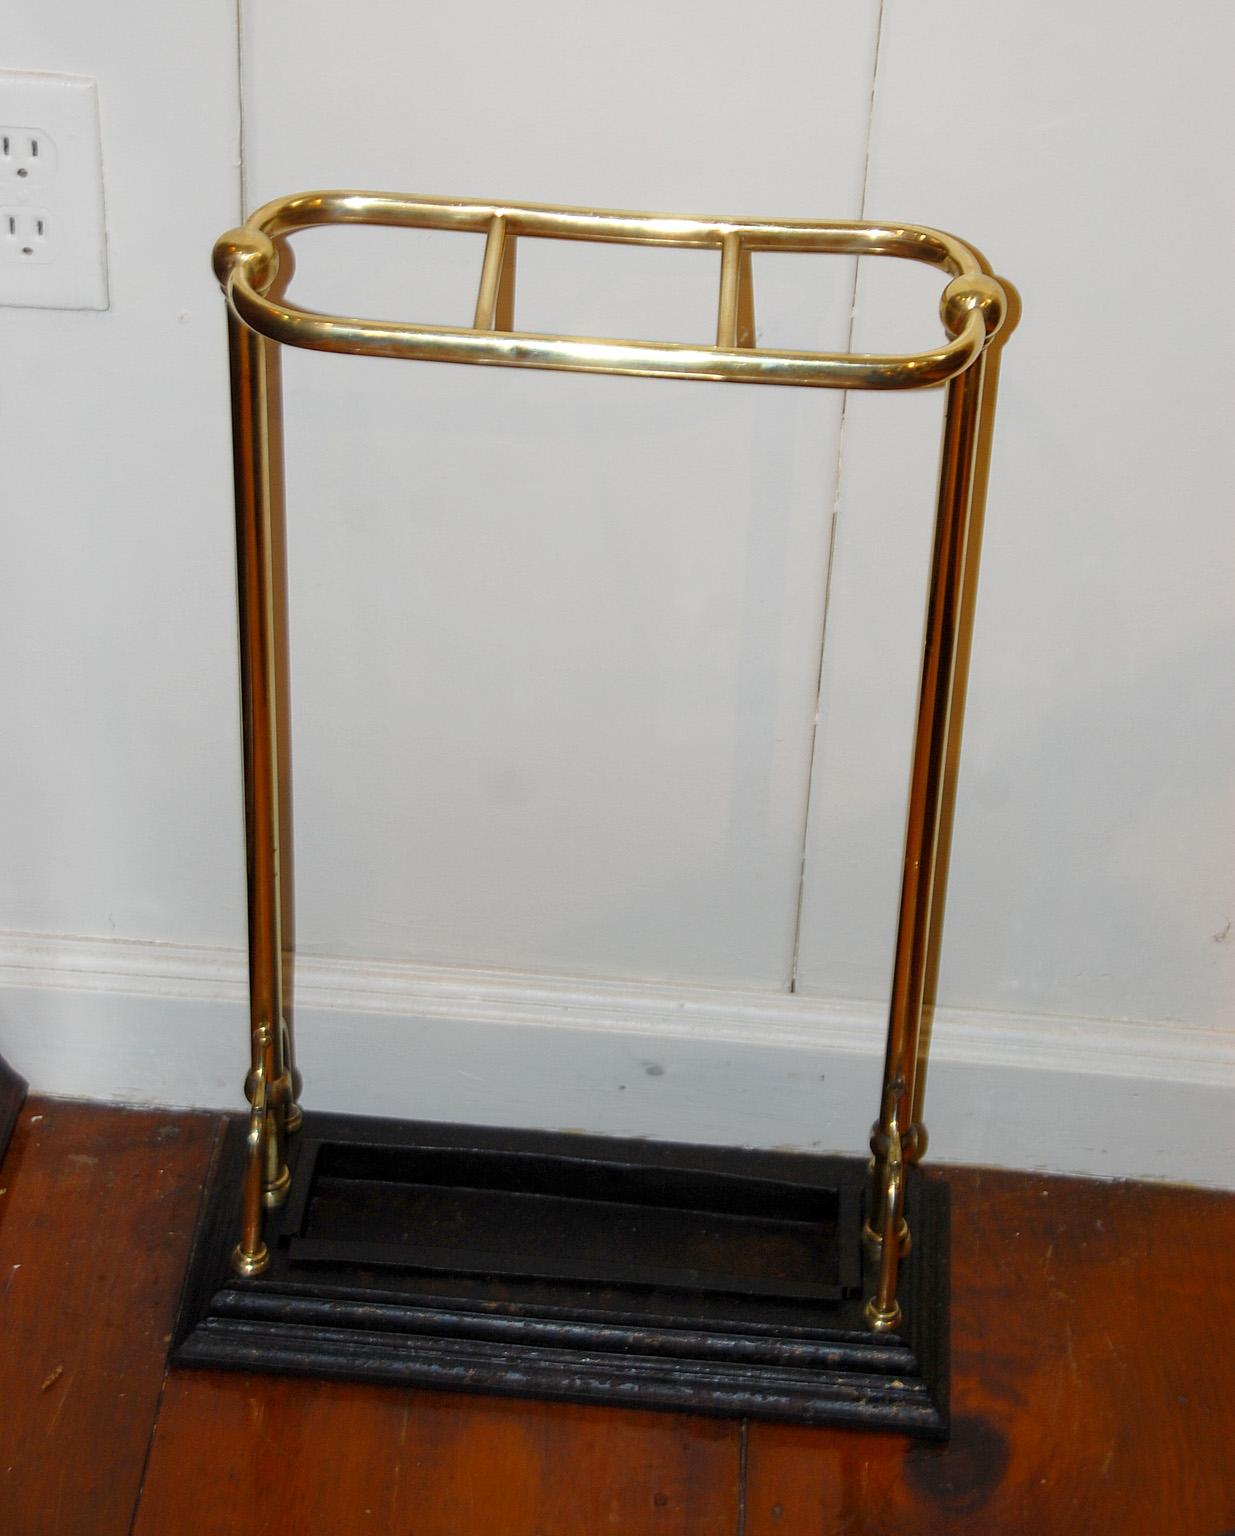 English 19th century brass and iron umbrella or stick stand. This compact walking stick stand or umbrella stand is registry dated 1884. The cast iron base is painted black, as is the removable iron drip pan.